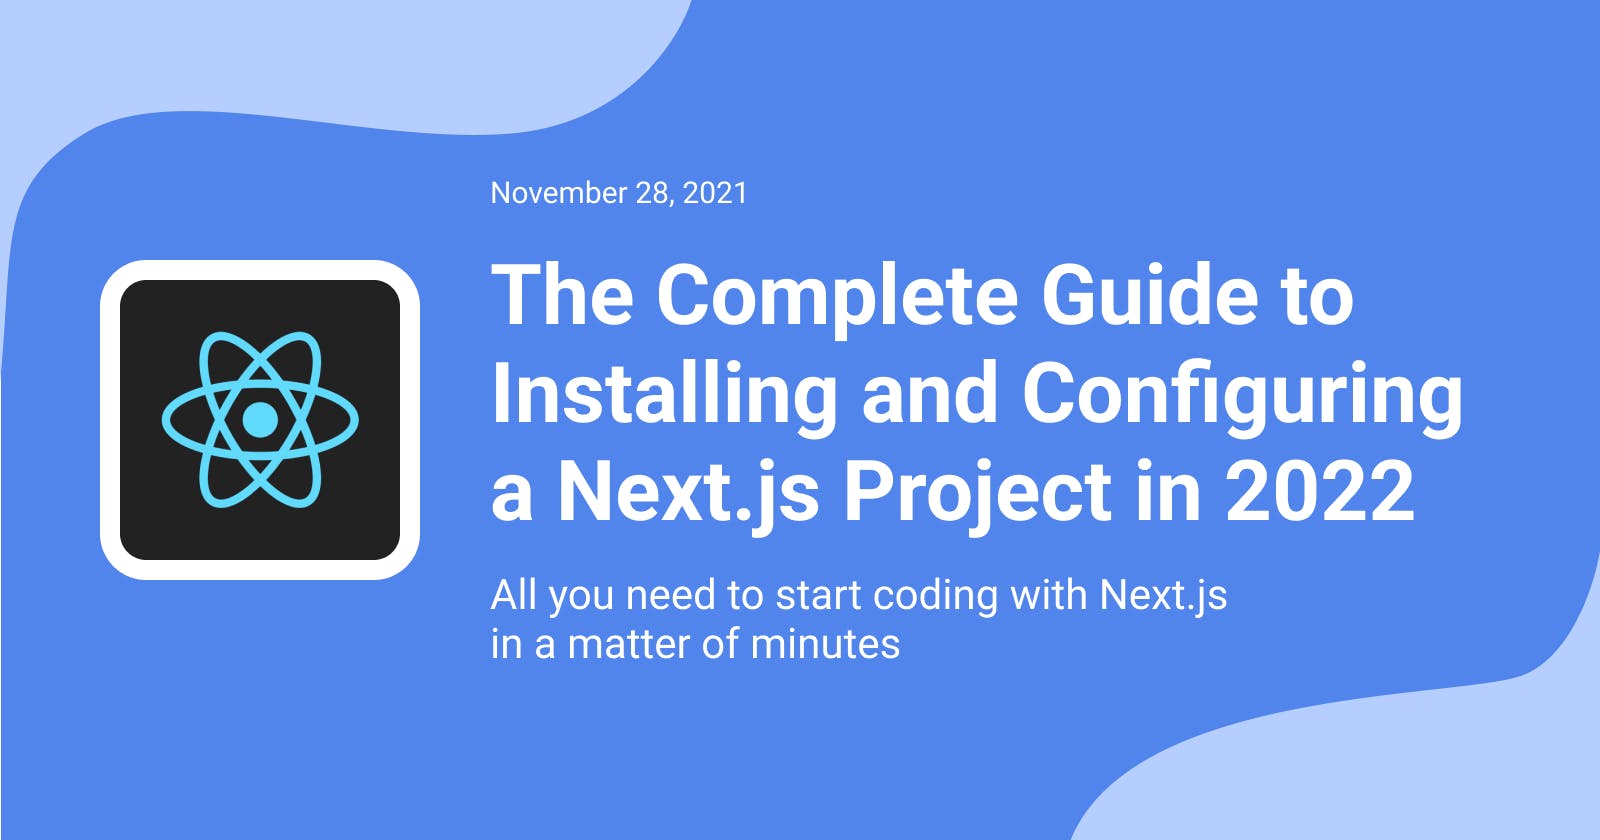 The Complete Guide to Installing and Configuring a Next.js Project in 2022